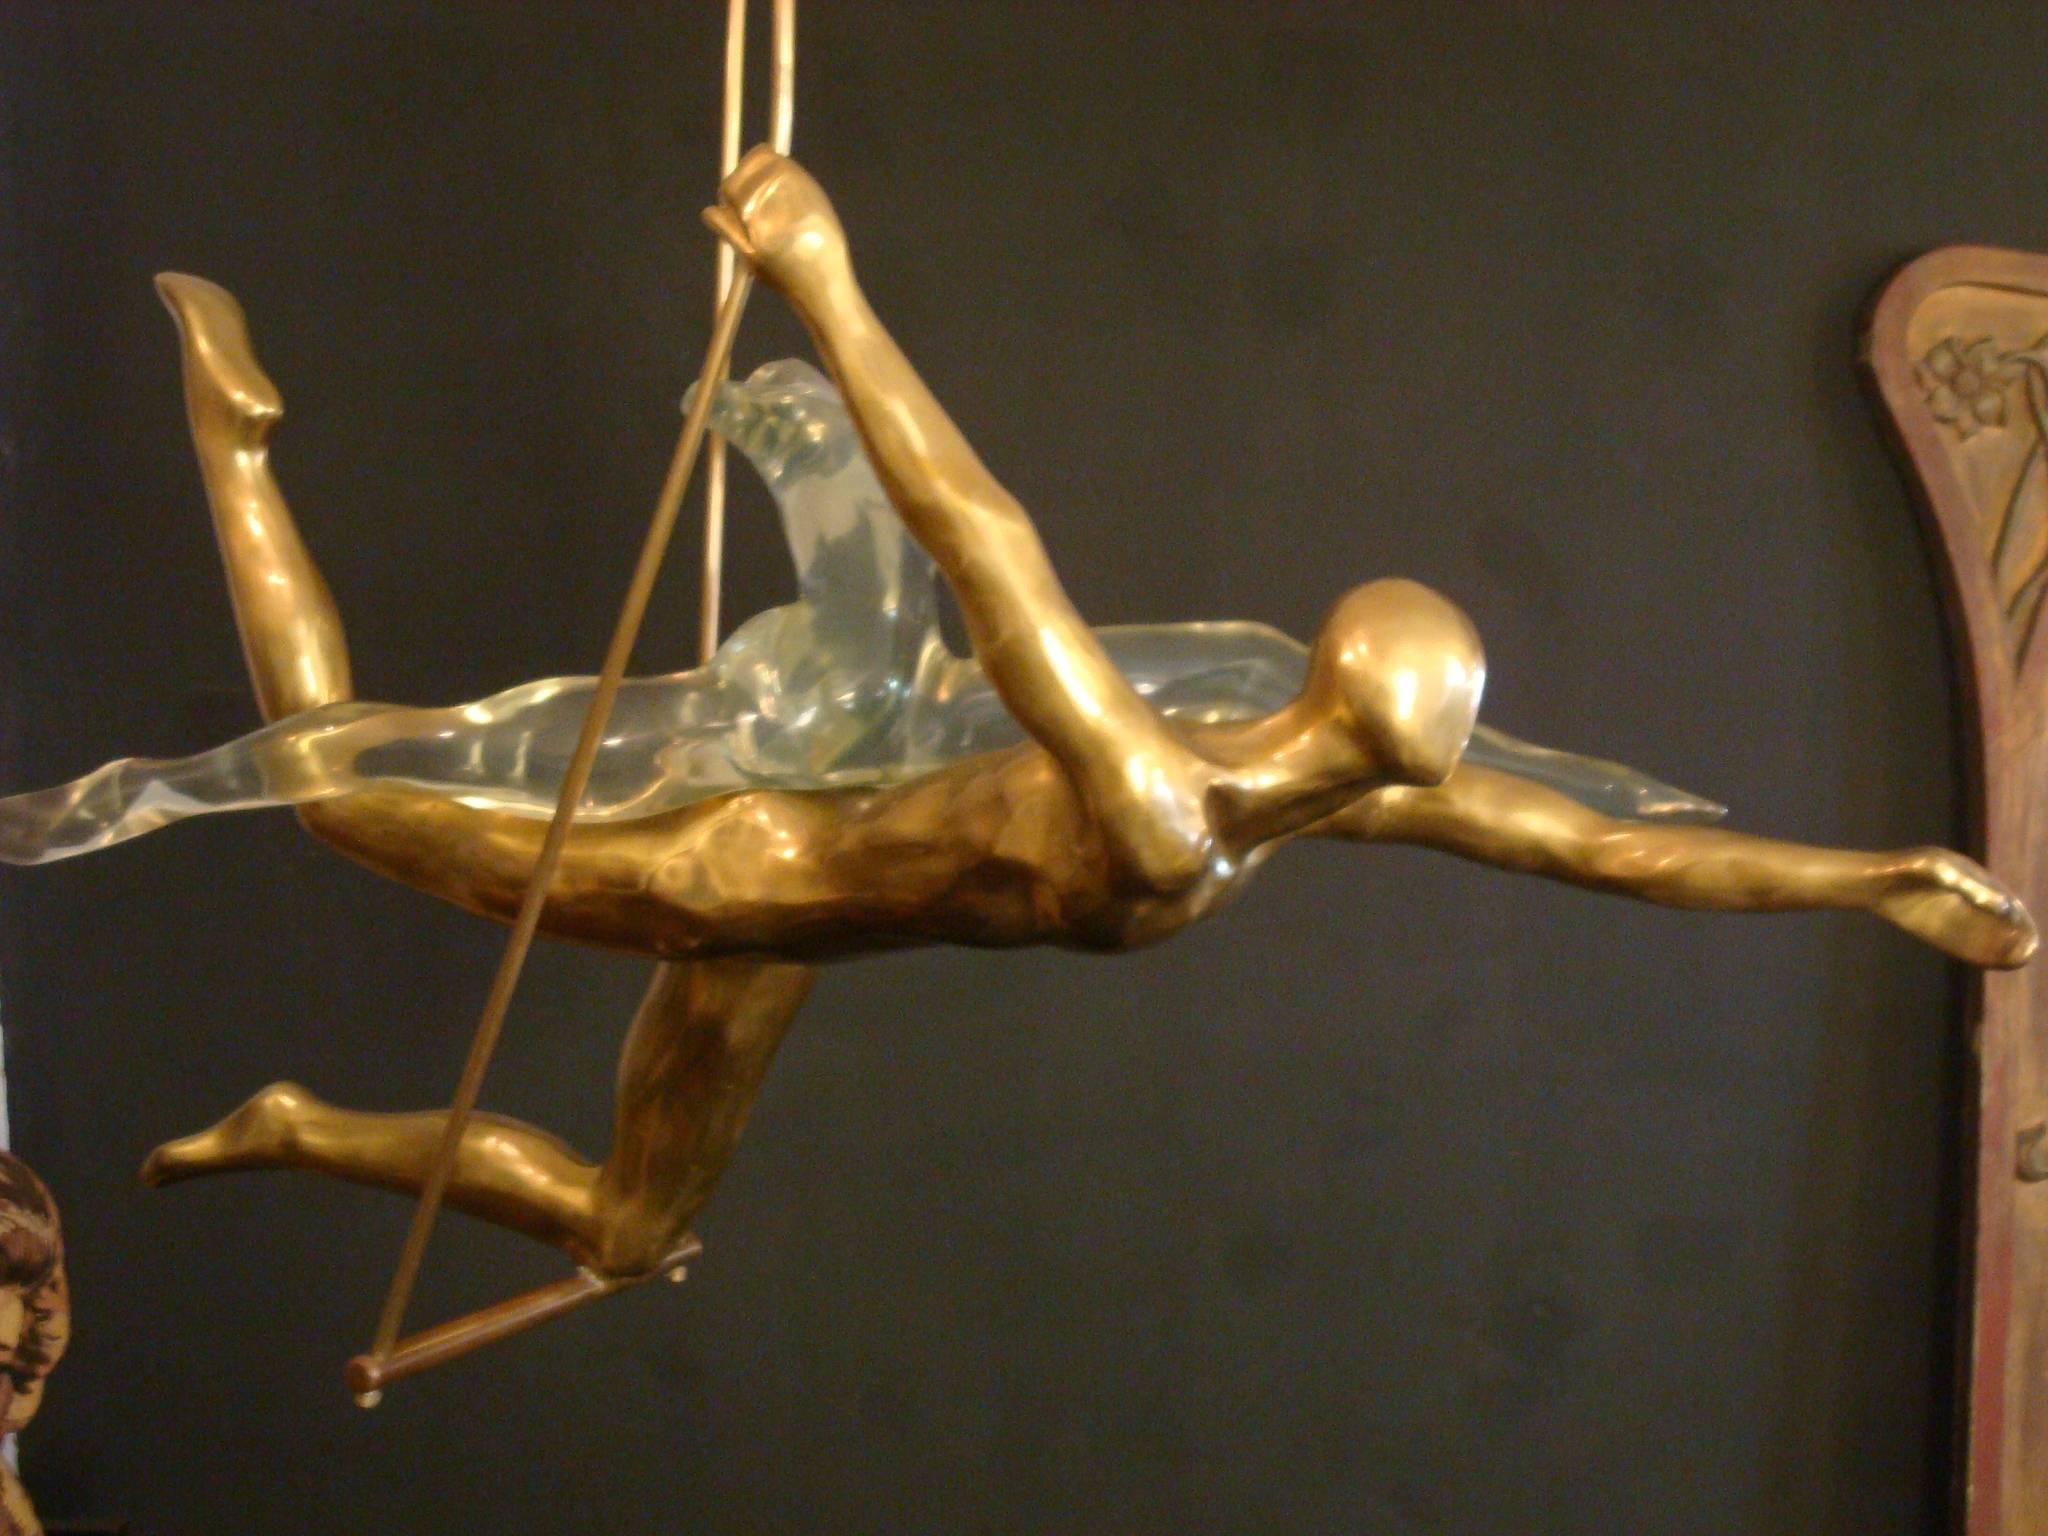 Italian Fantastic Couple on a Circus Trapeze, Sculpture by Max Forti, Italy, 1984